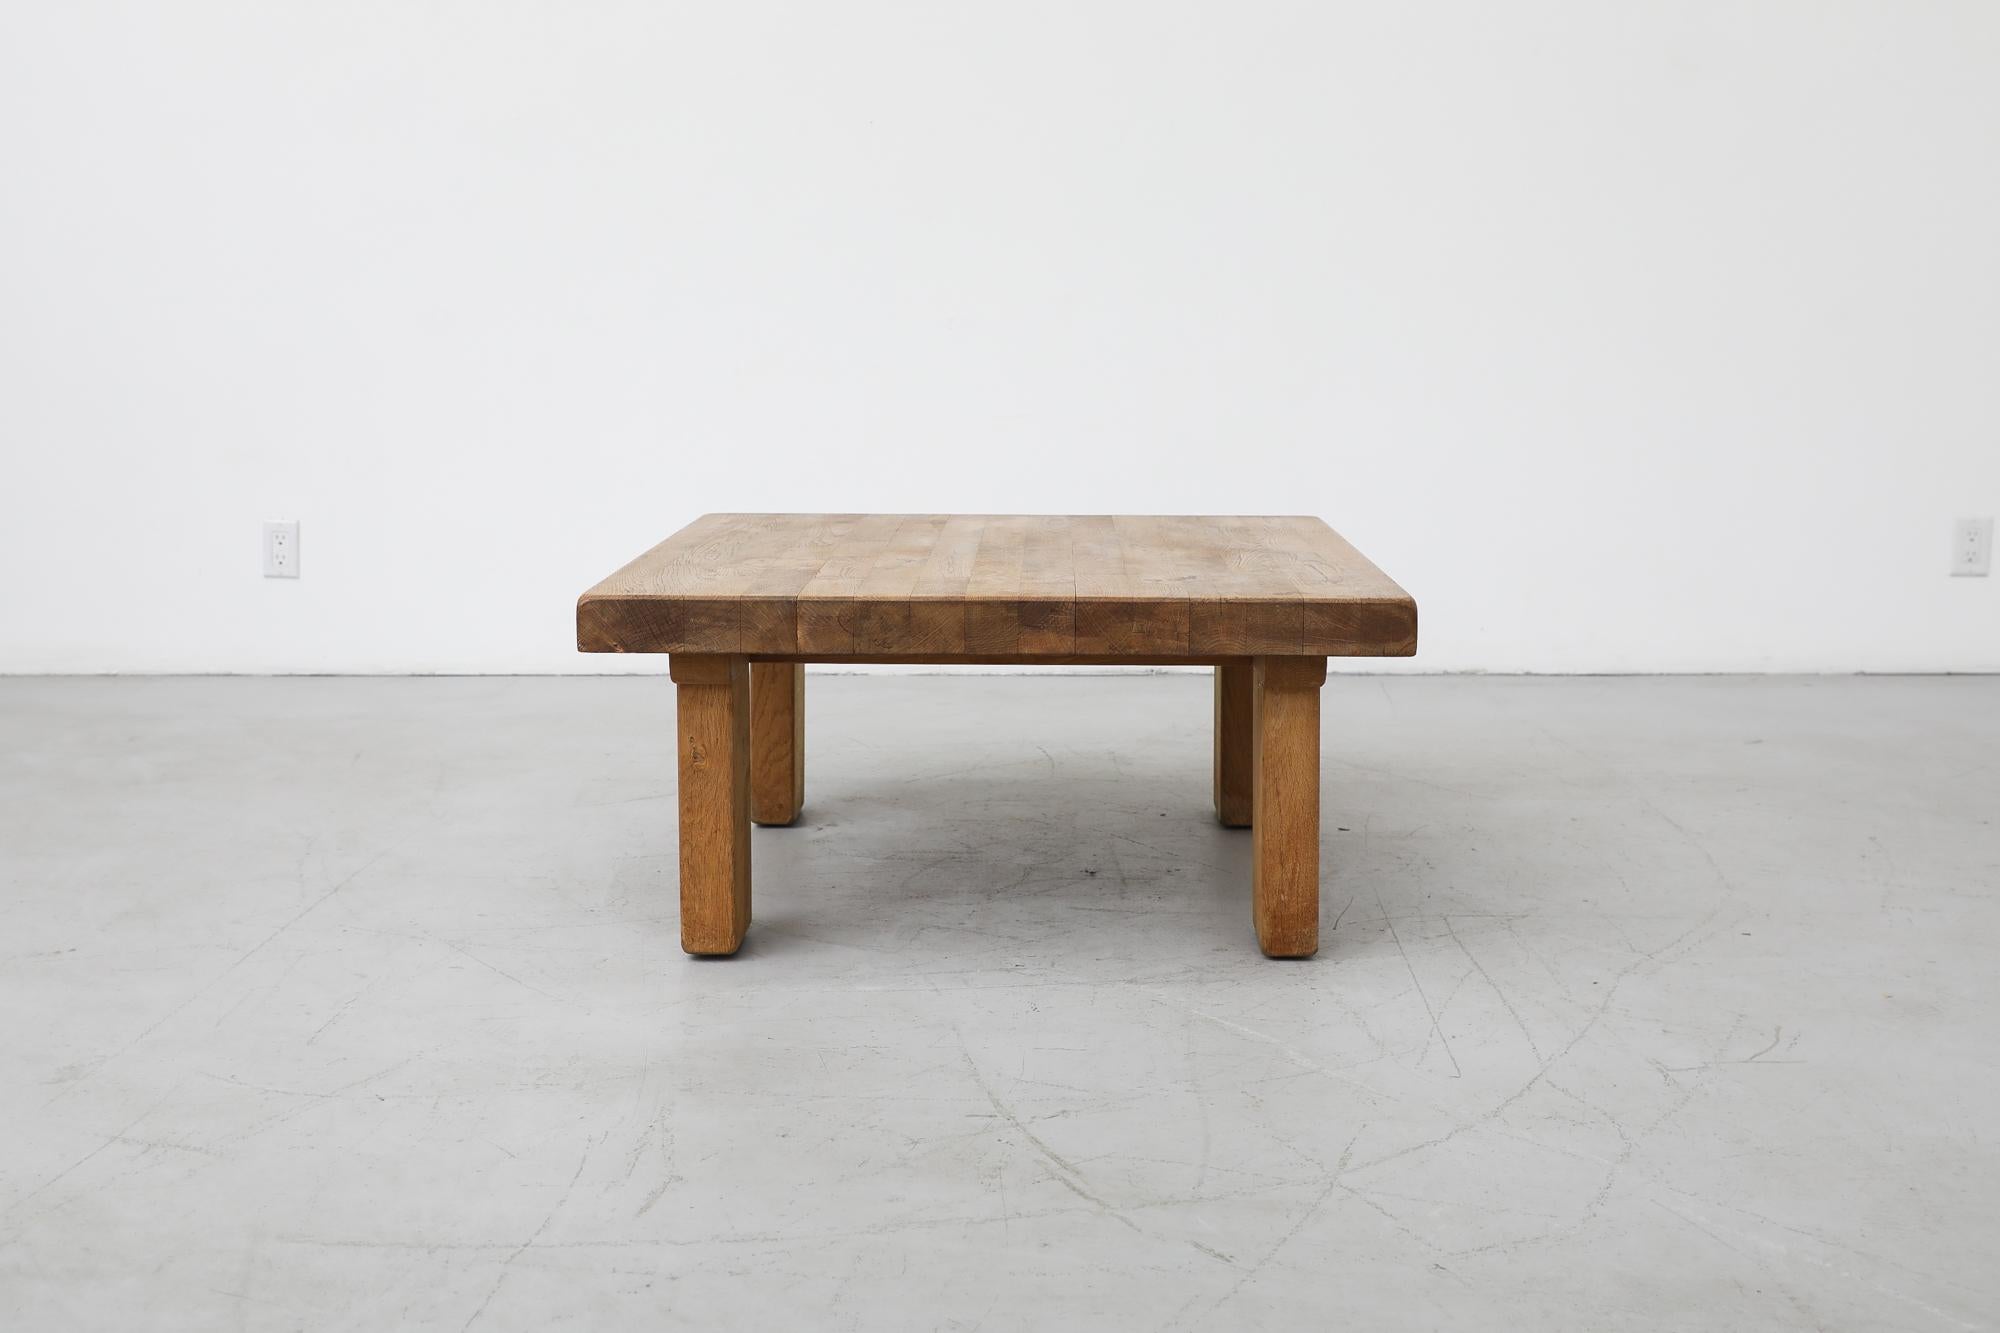 Beautiful midcentury heavy oak square coffee table with clean boxy design, exposed support beams and thick rectangular legs. This table is in original condition with visible signs of wear consistent with its age and use.